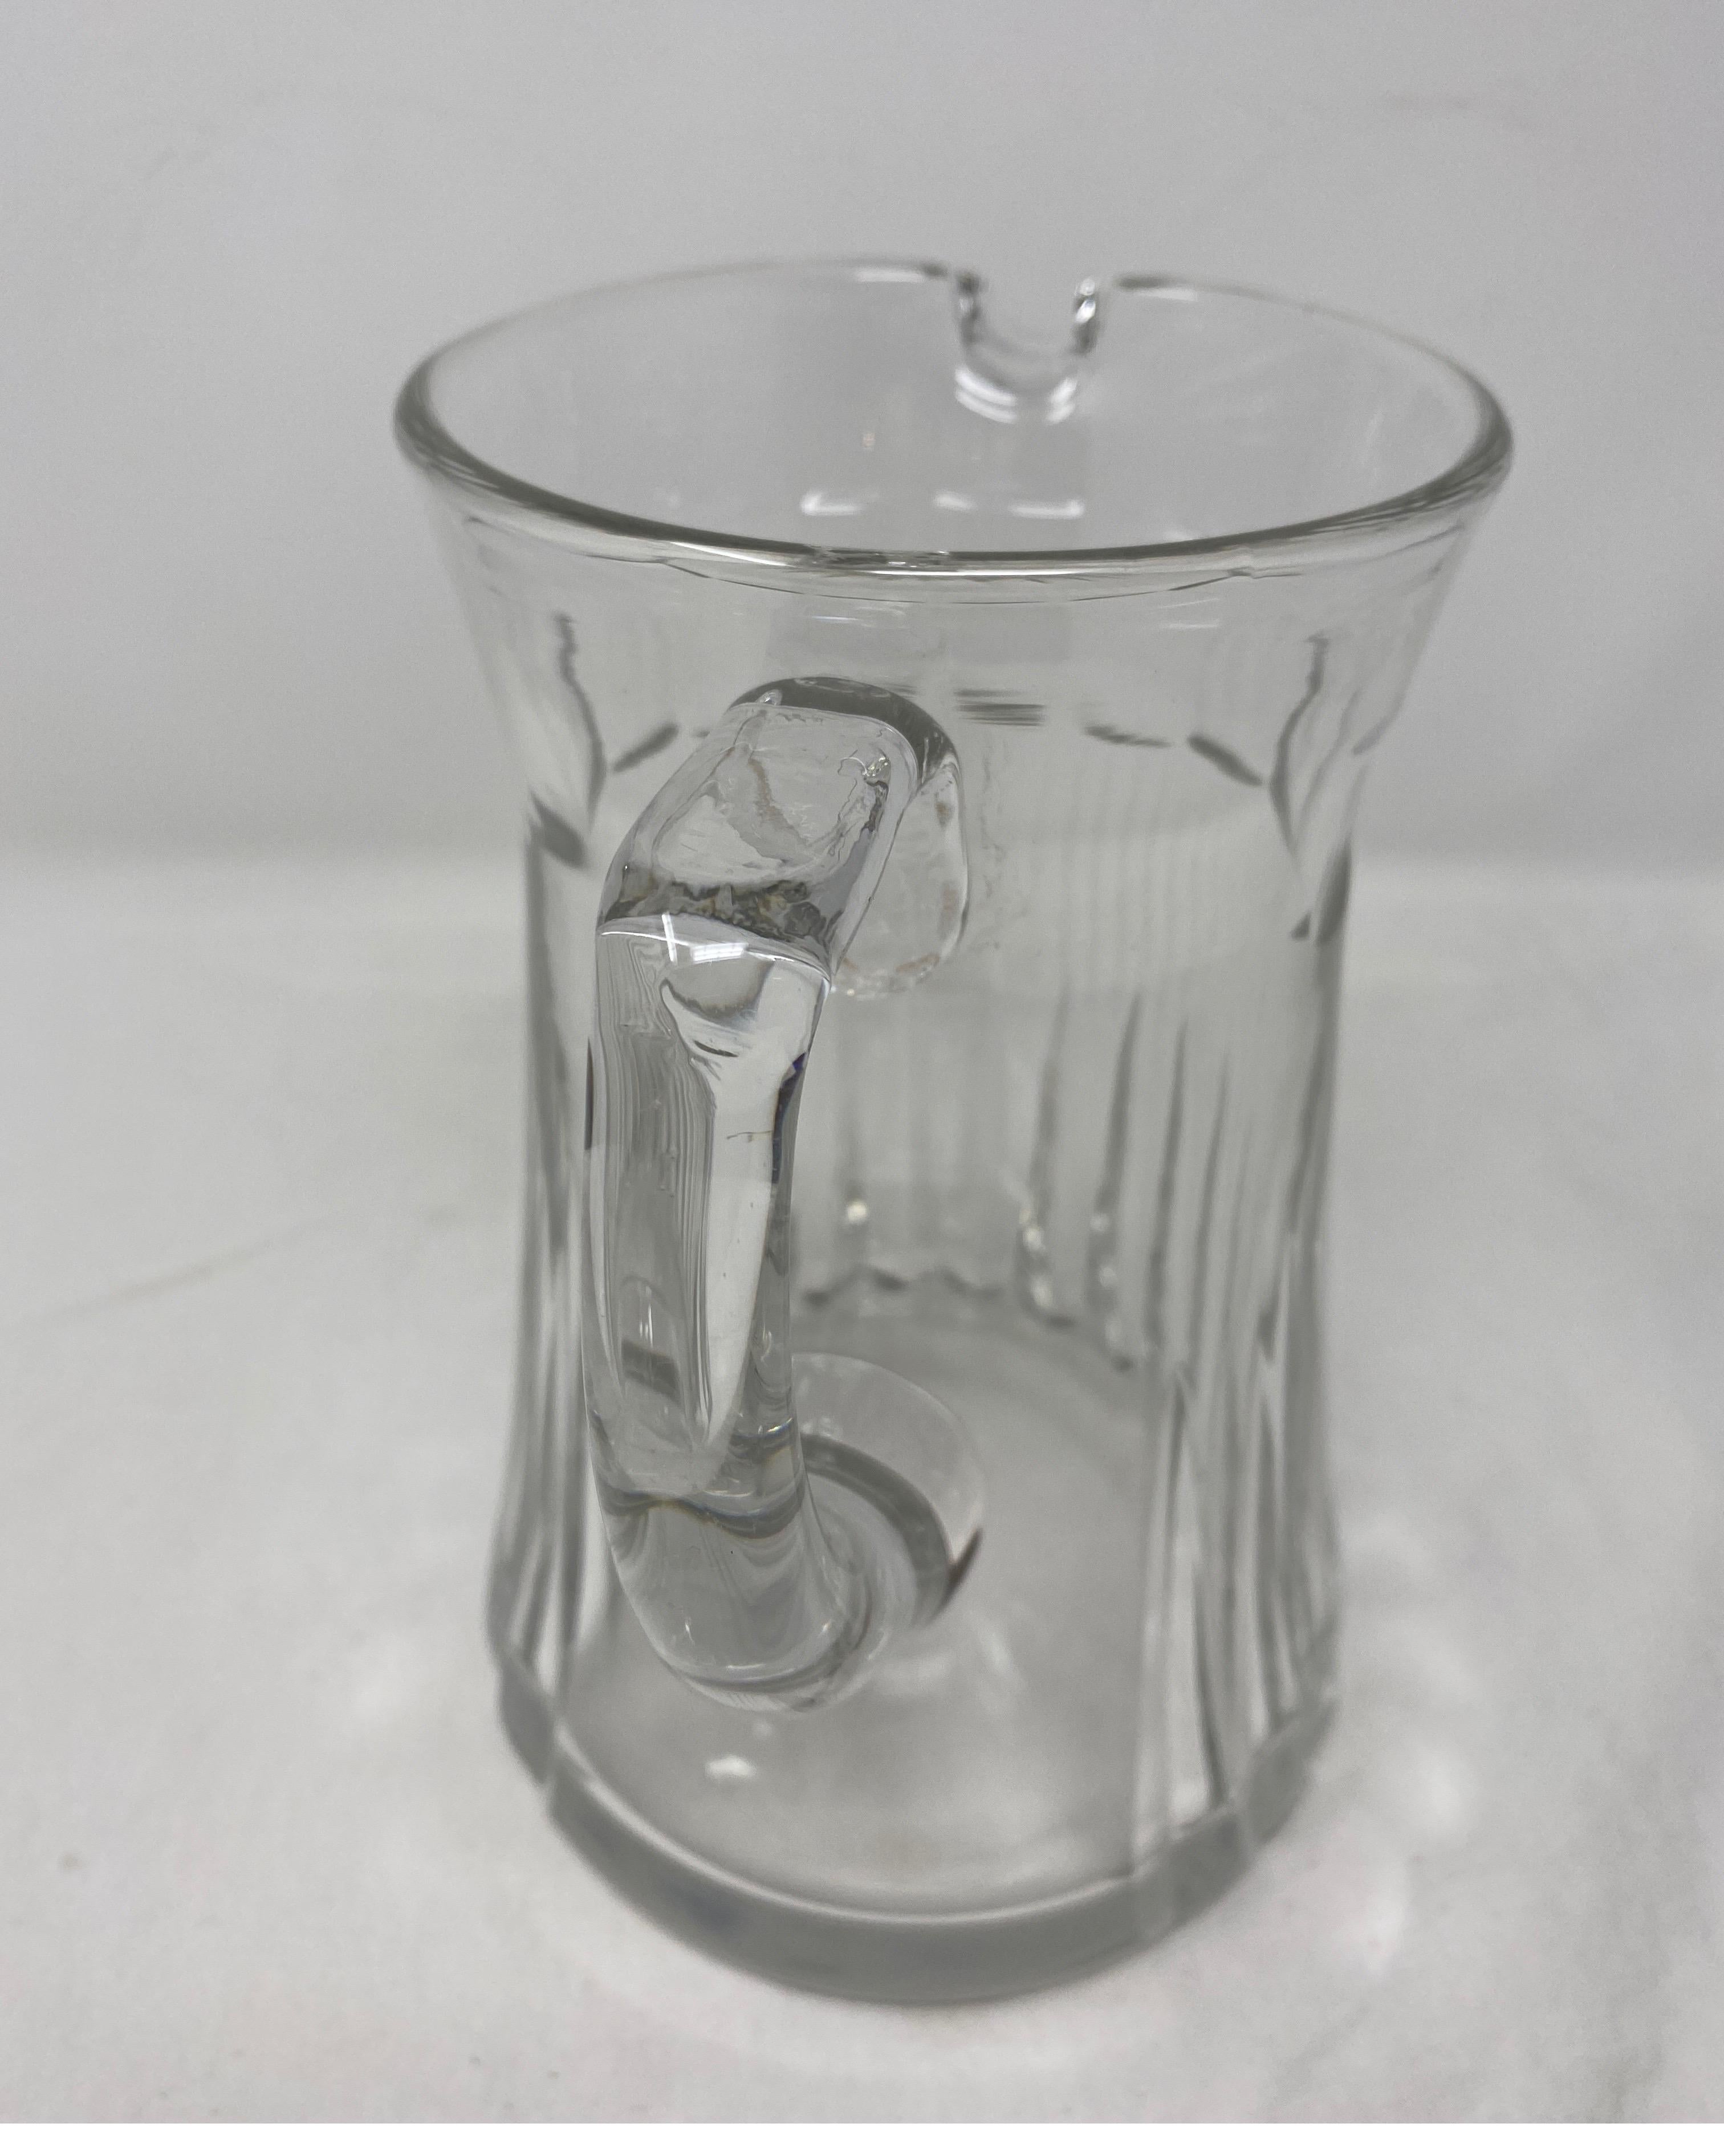 Antique crystal pitcher, 19th century.
6.5